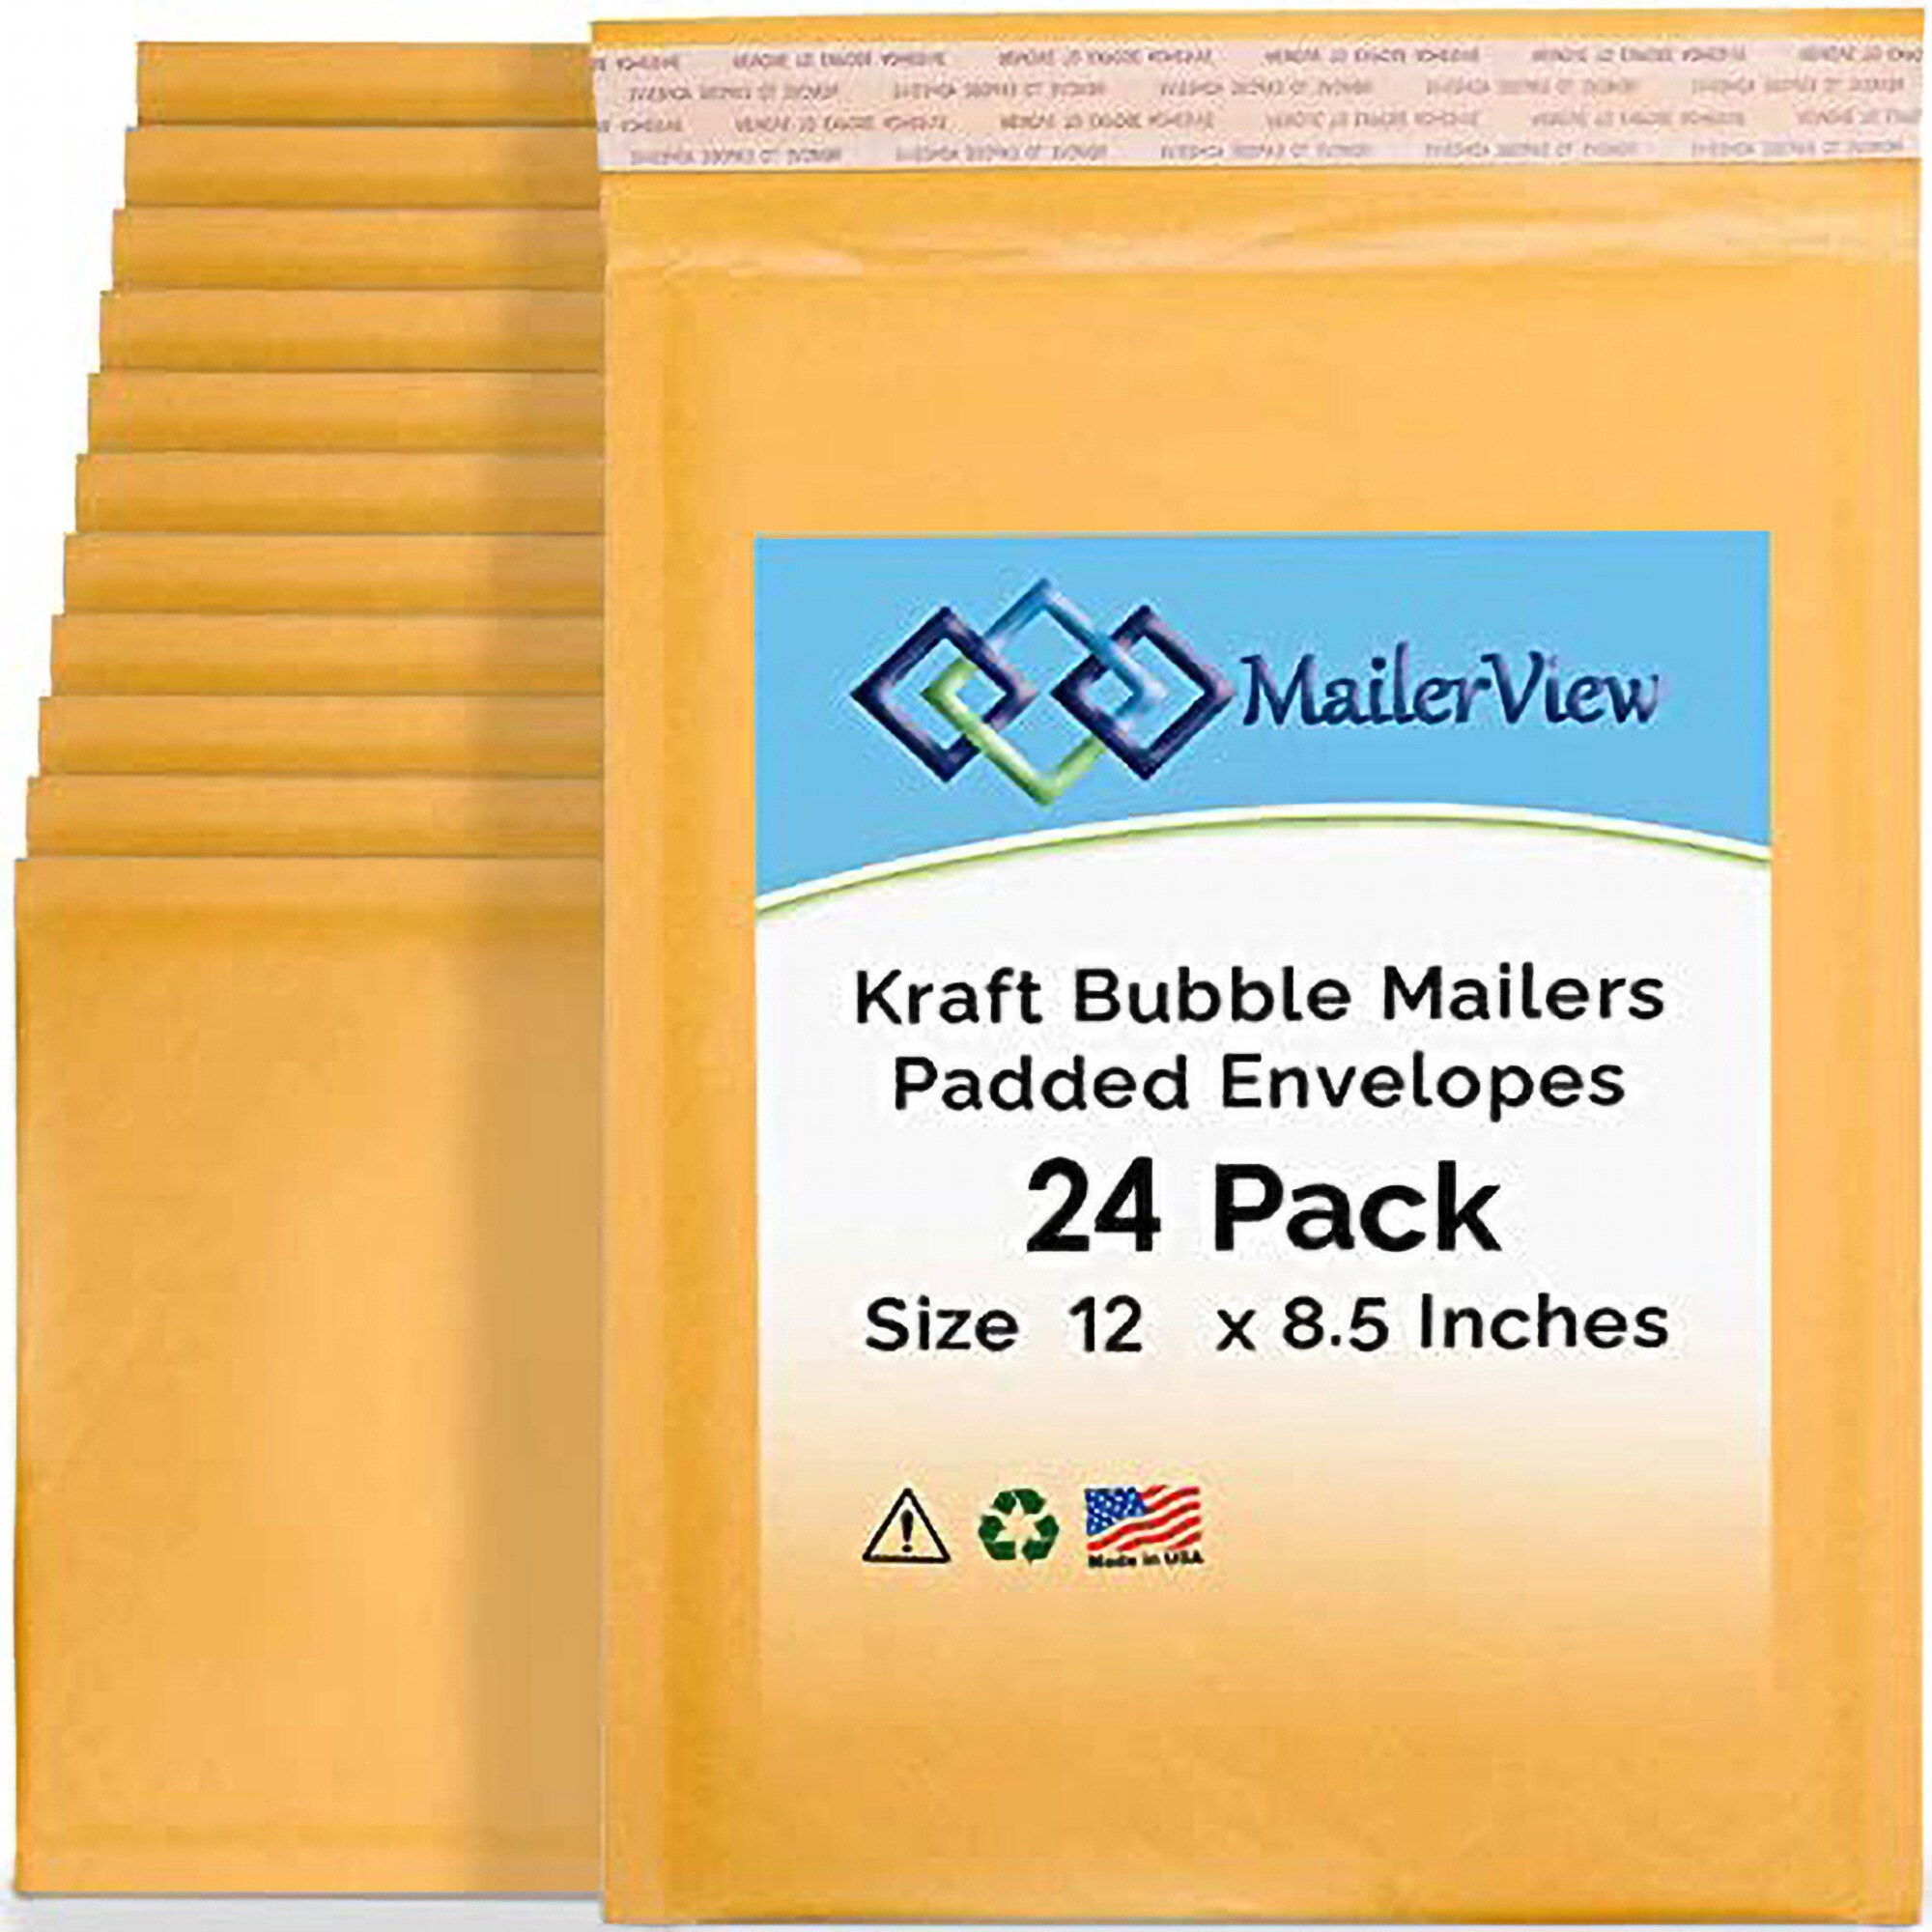 200 #2 8.5X12 KRAFT BUBBLE MAILERS PADDED ENVELOPES 8.5"X12" SHIPPING BAGS 